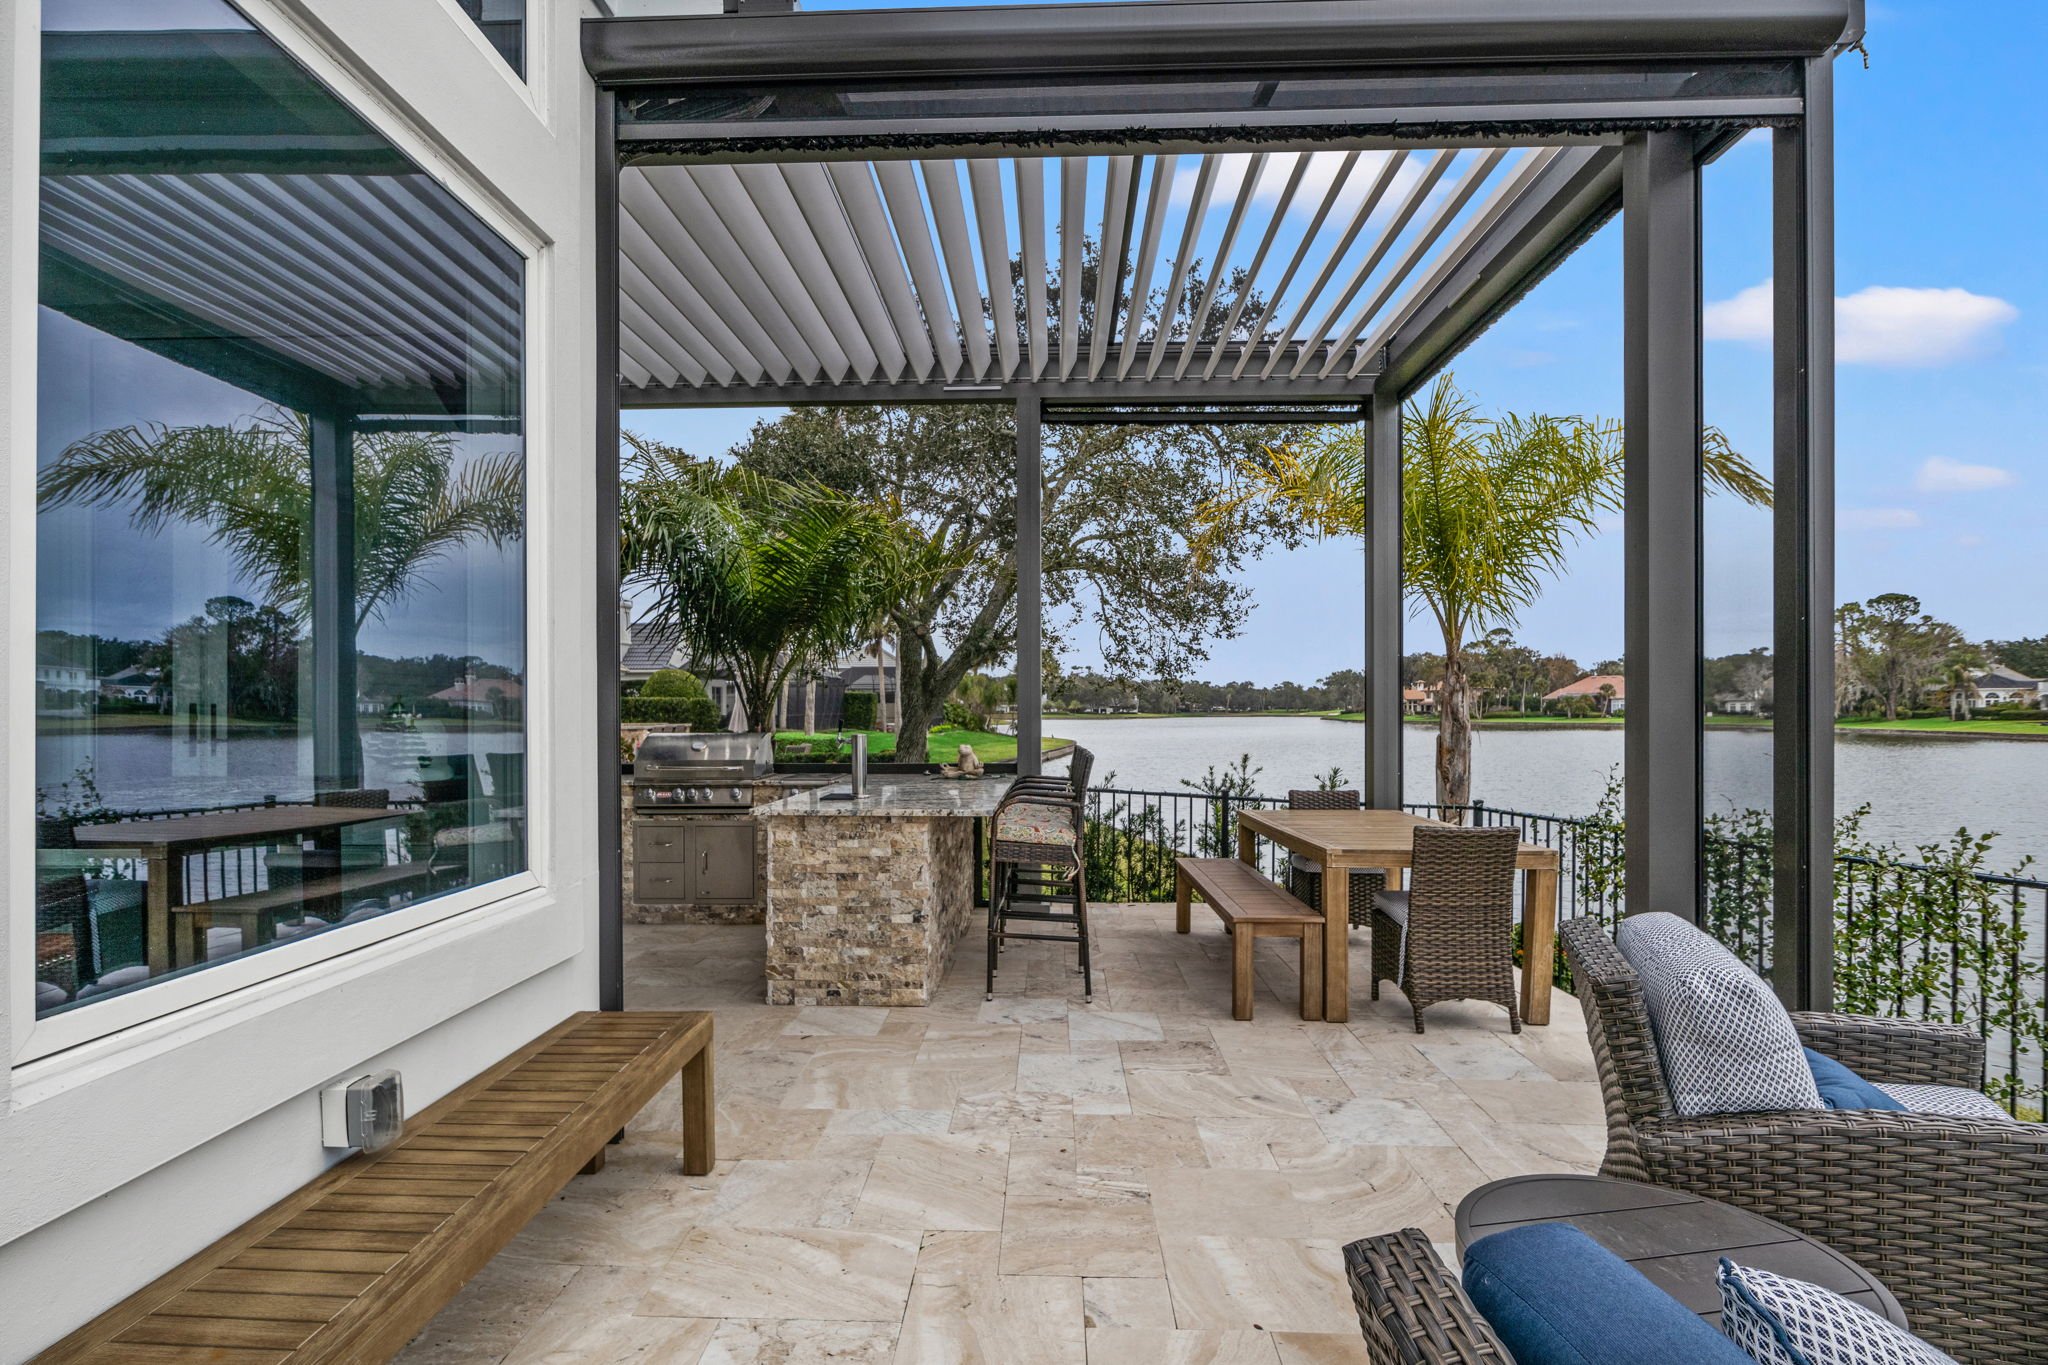 Outdoor Living Space in Jacksonville with Smart Pergola and Dining Area